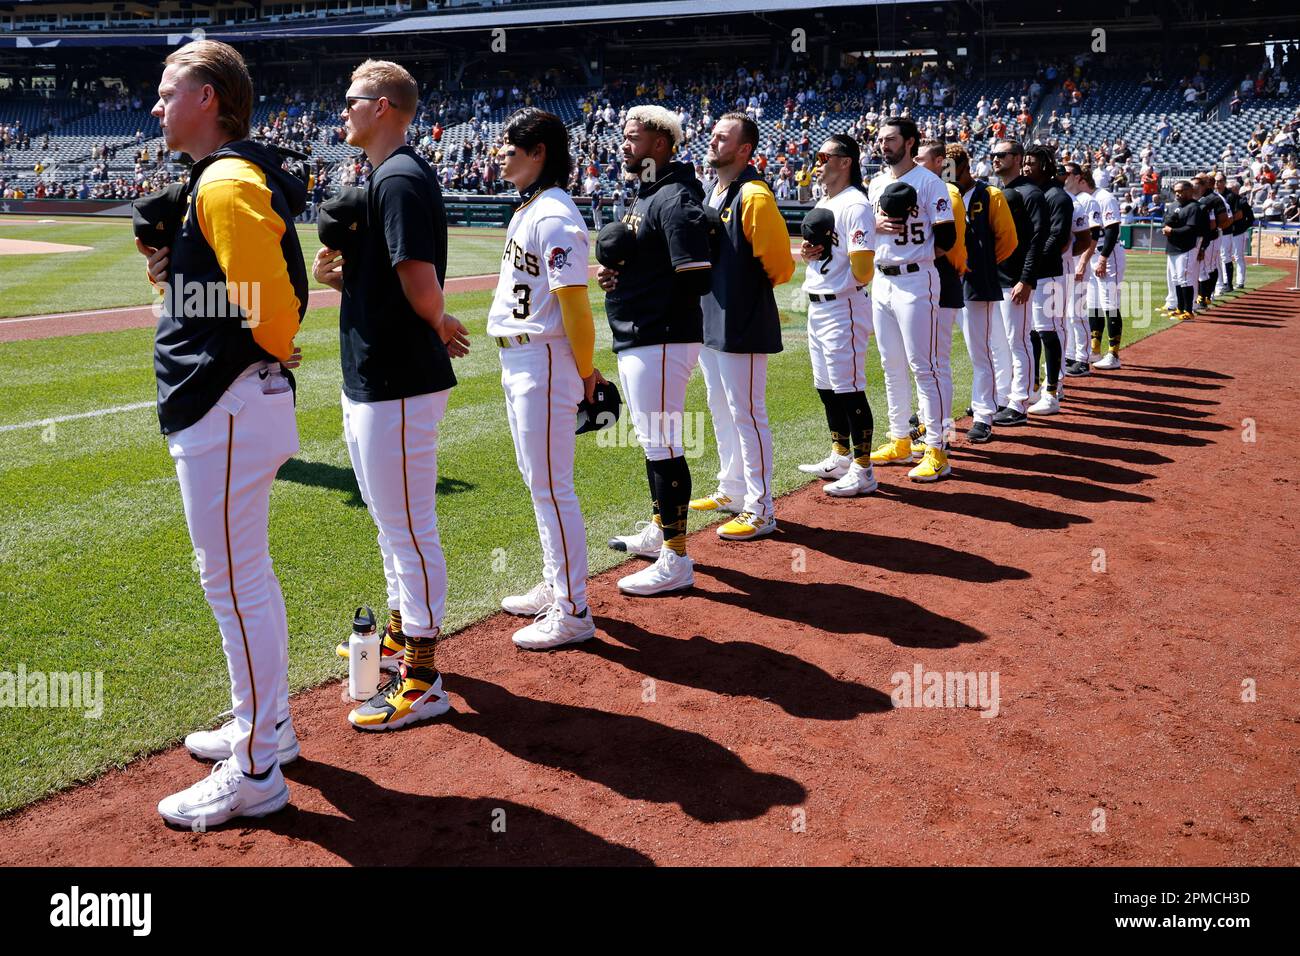 PITTSBURGH, PA - APRIL 12: Pittsburgh Pirates players line up for the  National Anthem prior to an MLB game against the Houston Astros on April  12, 2023 at PNC Park in Pittsburgh